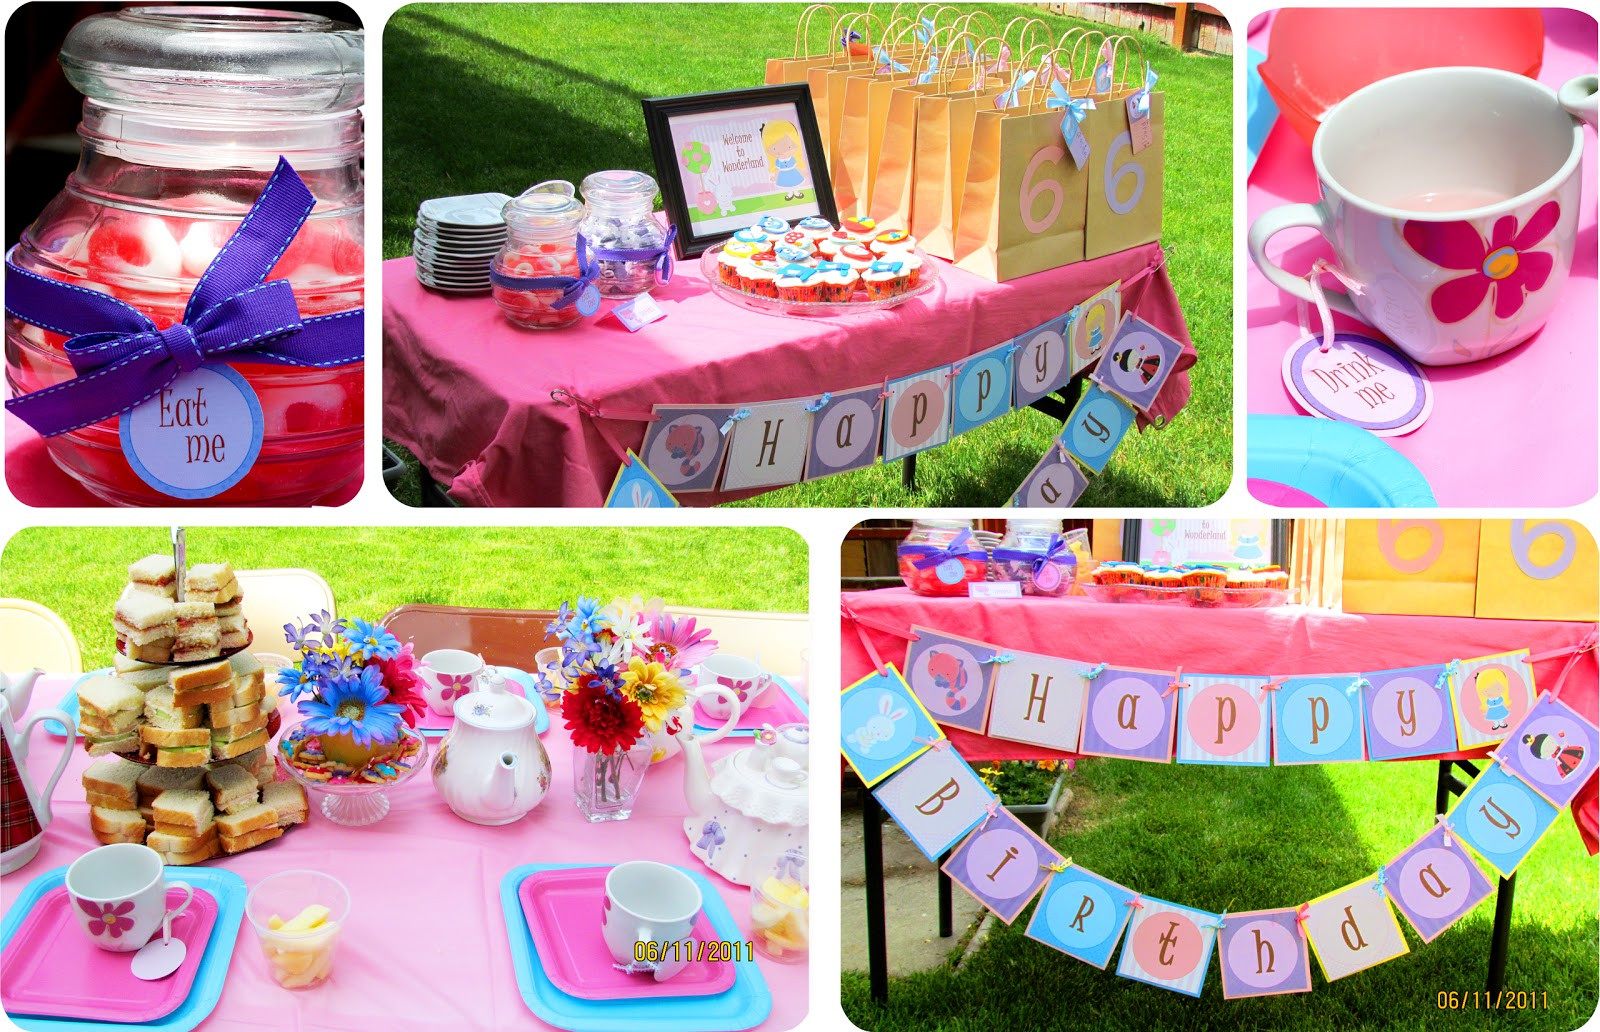 Mad Hatter Tea Party Decoration Ideas
 nslittleshop party decorations and more Mad Hatter Tea